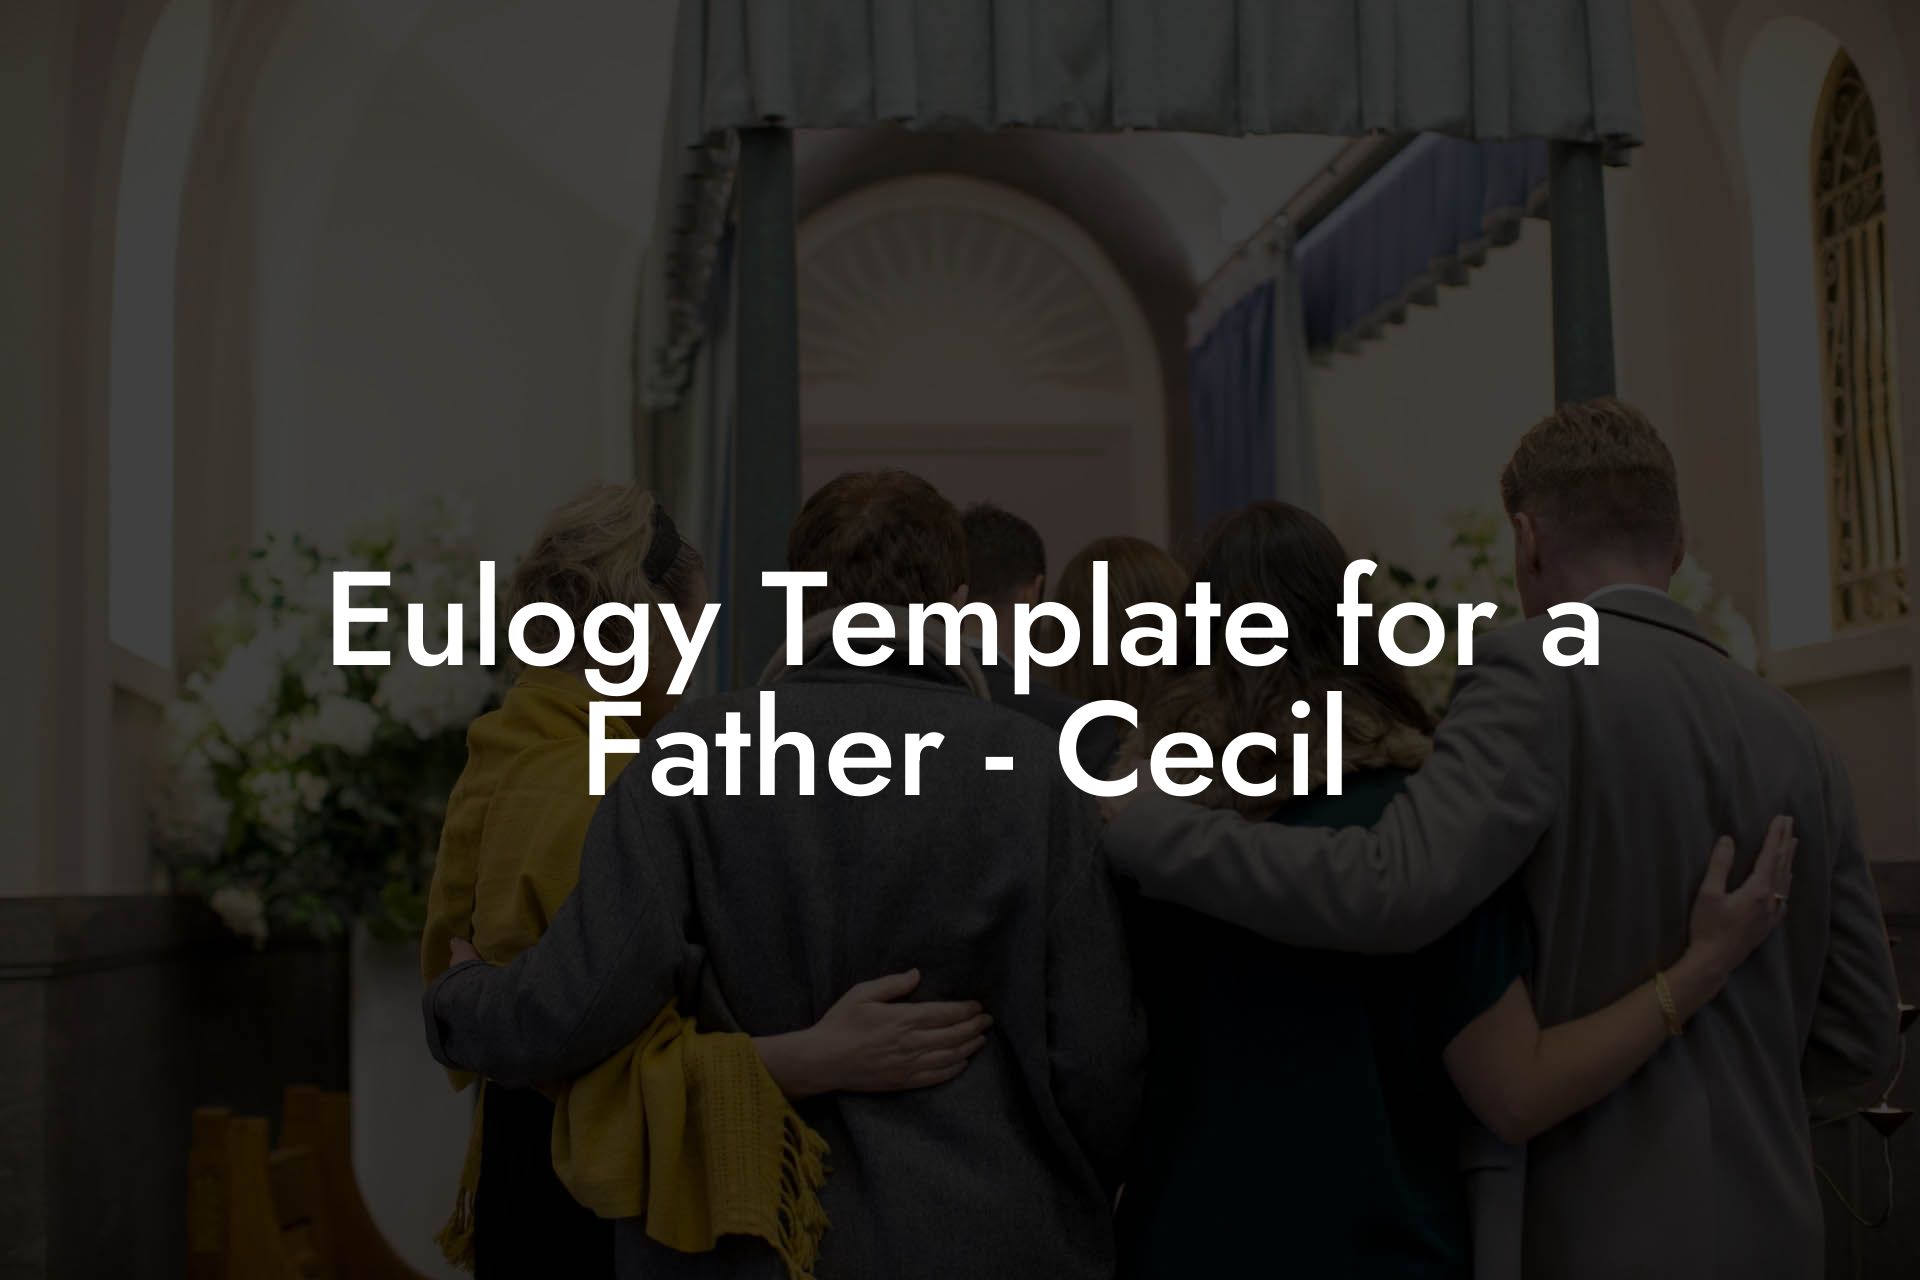 Eulogy Template for a Father - Cecil